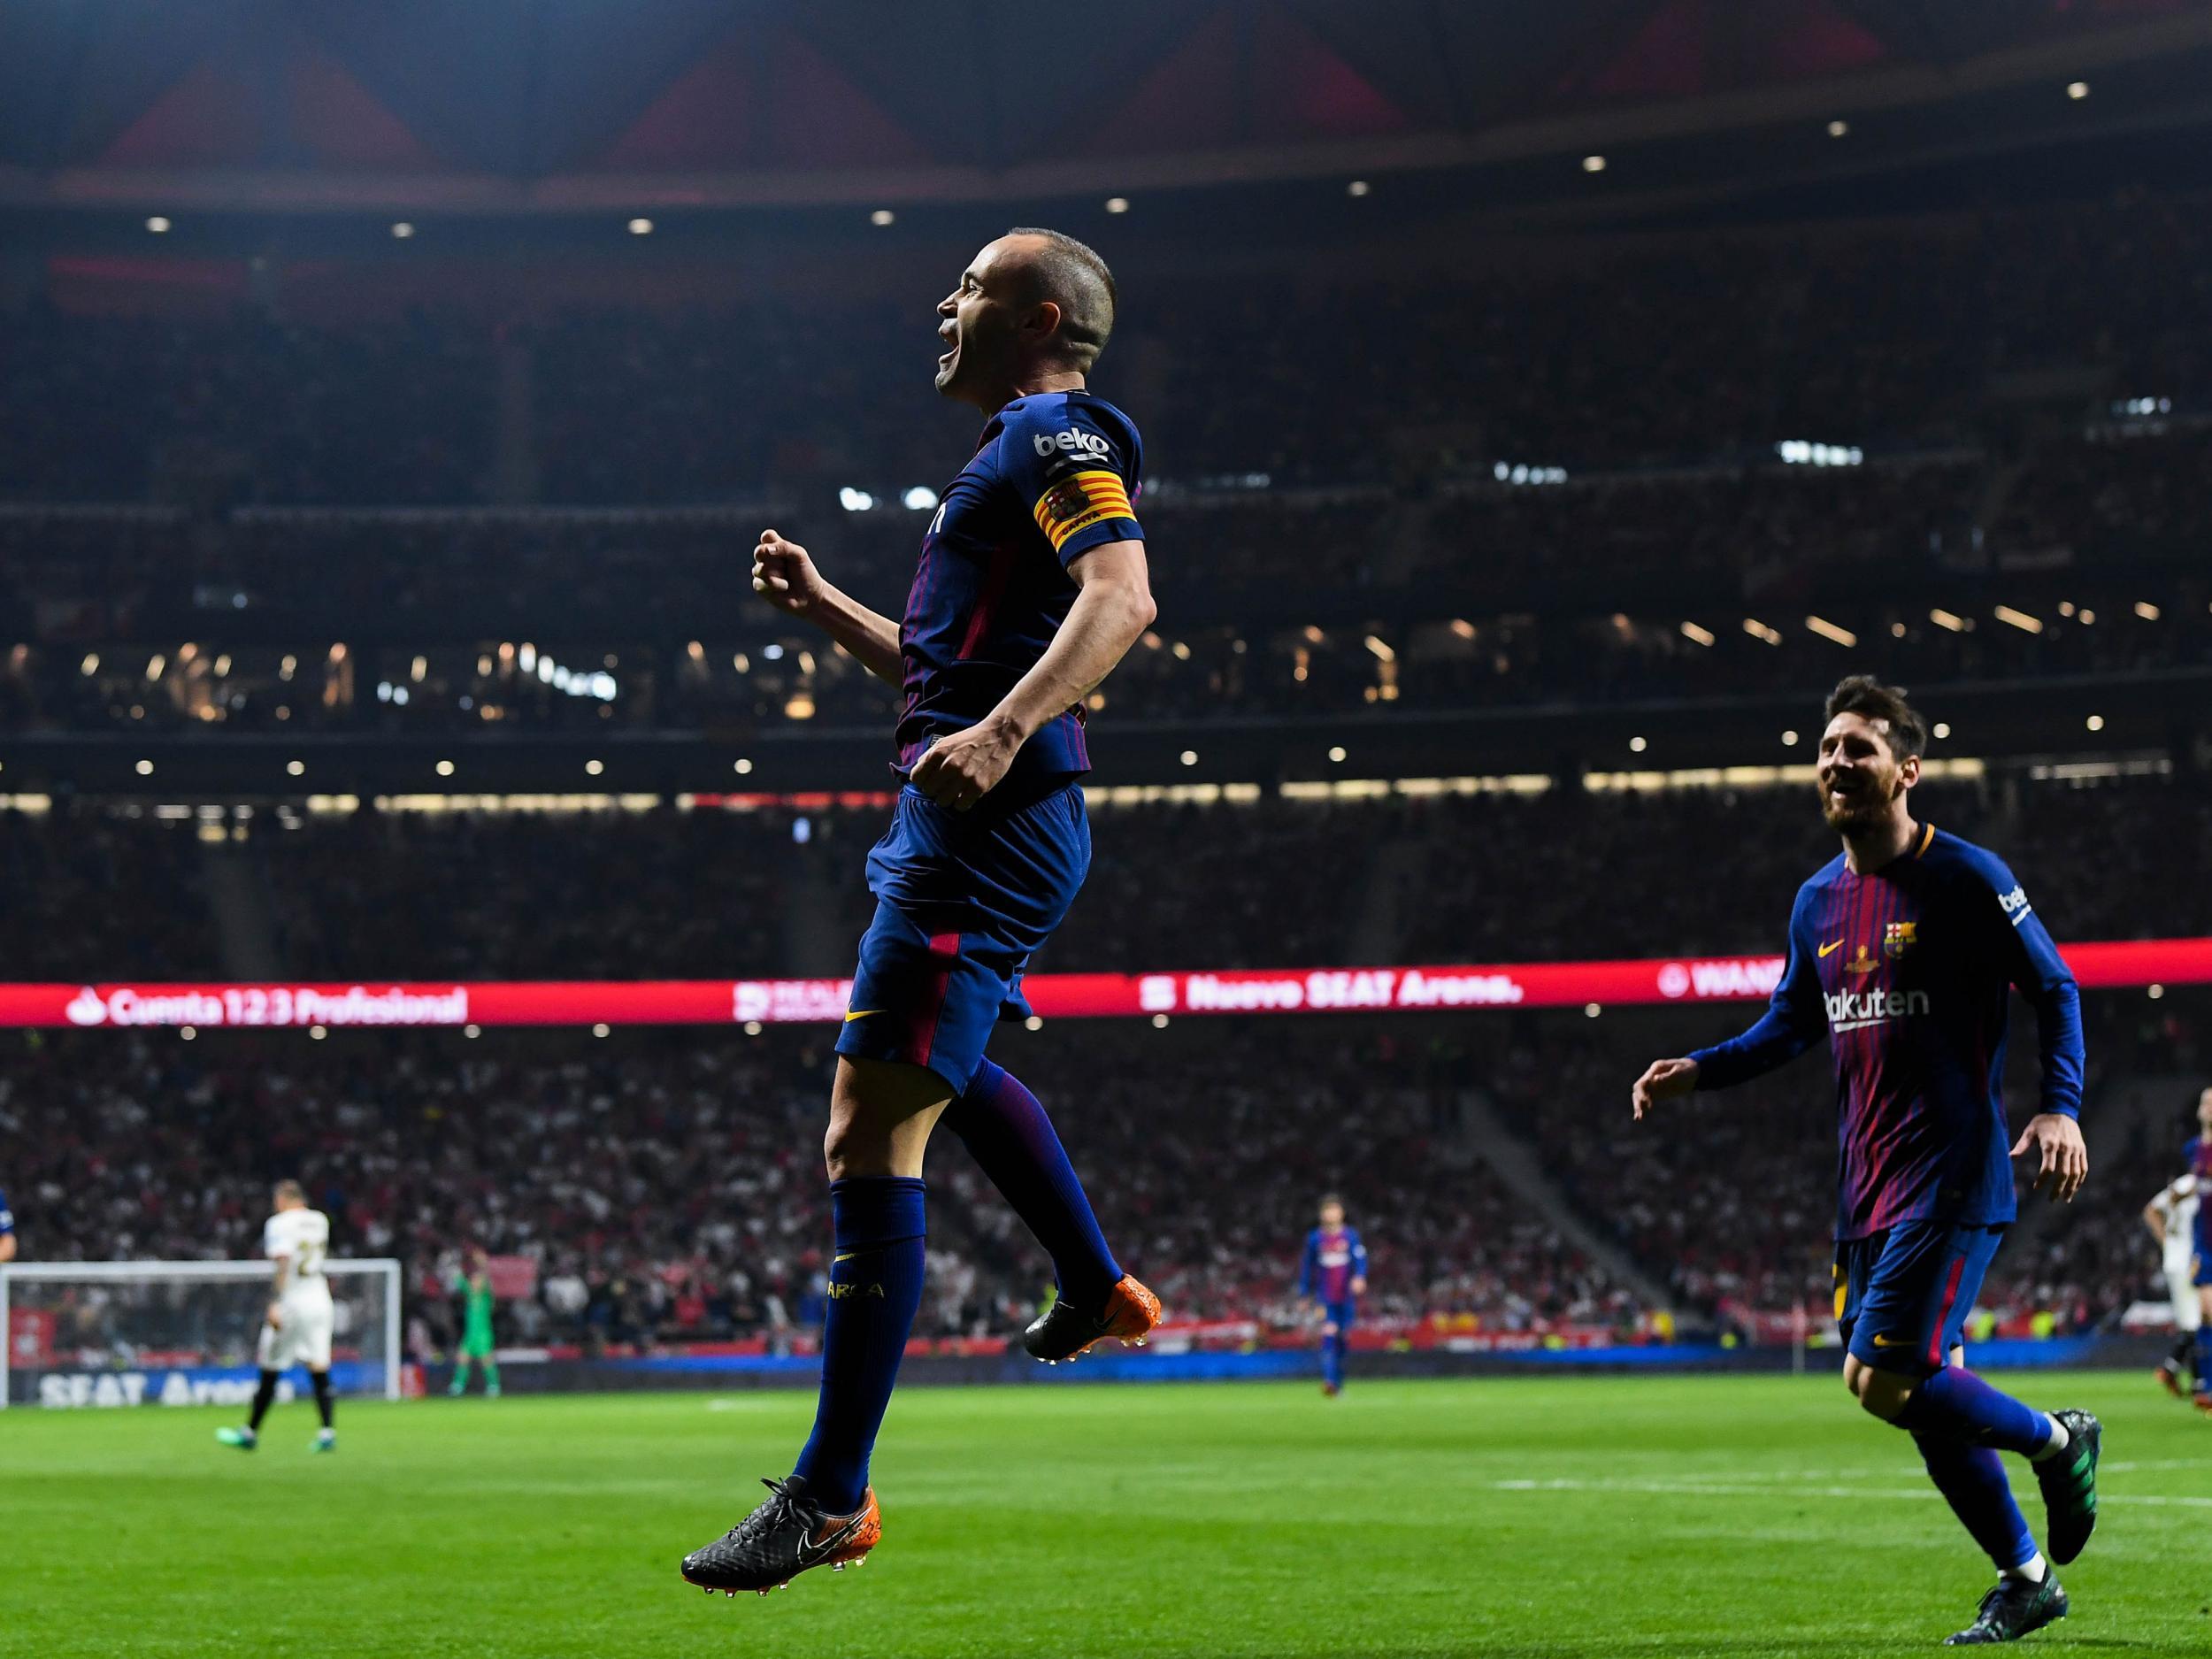 Iniesta crowned a masterful performance with a goal